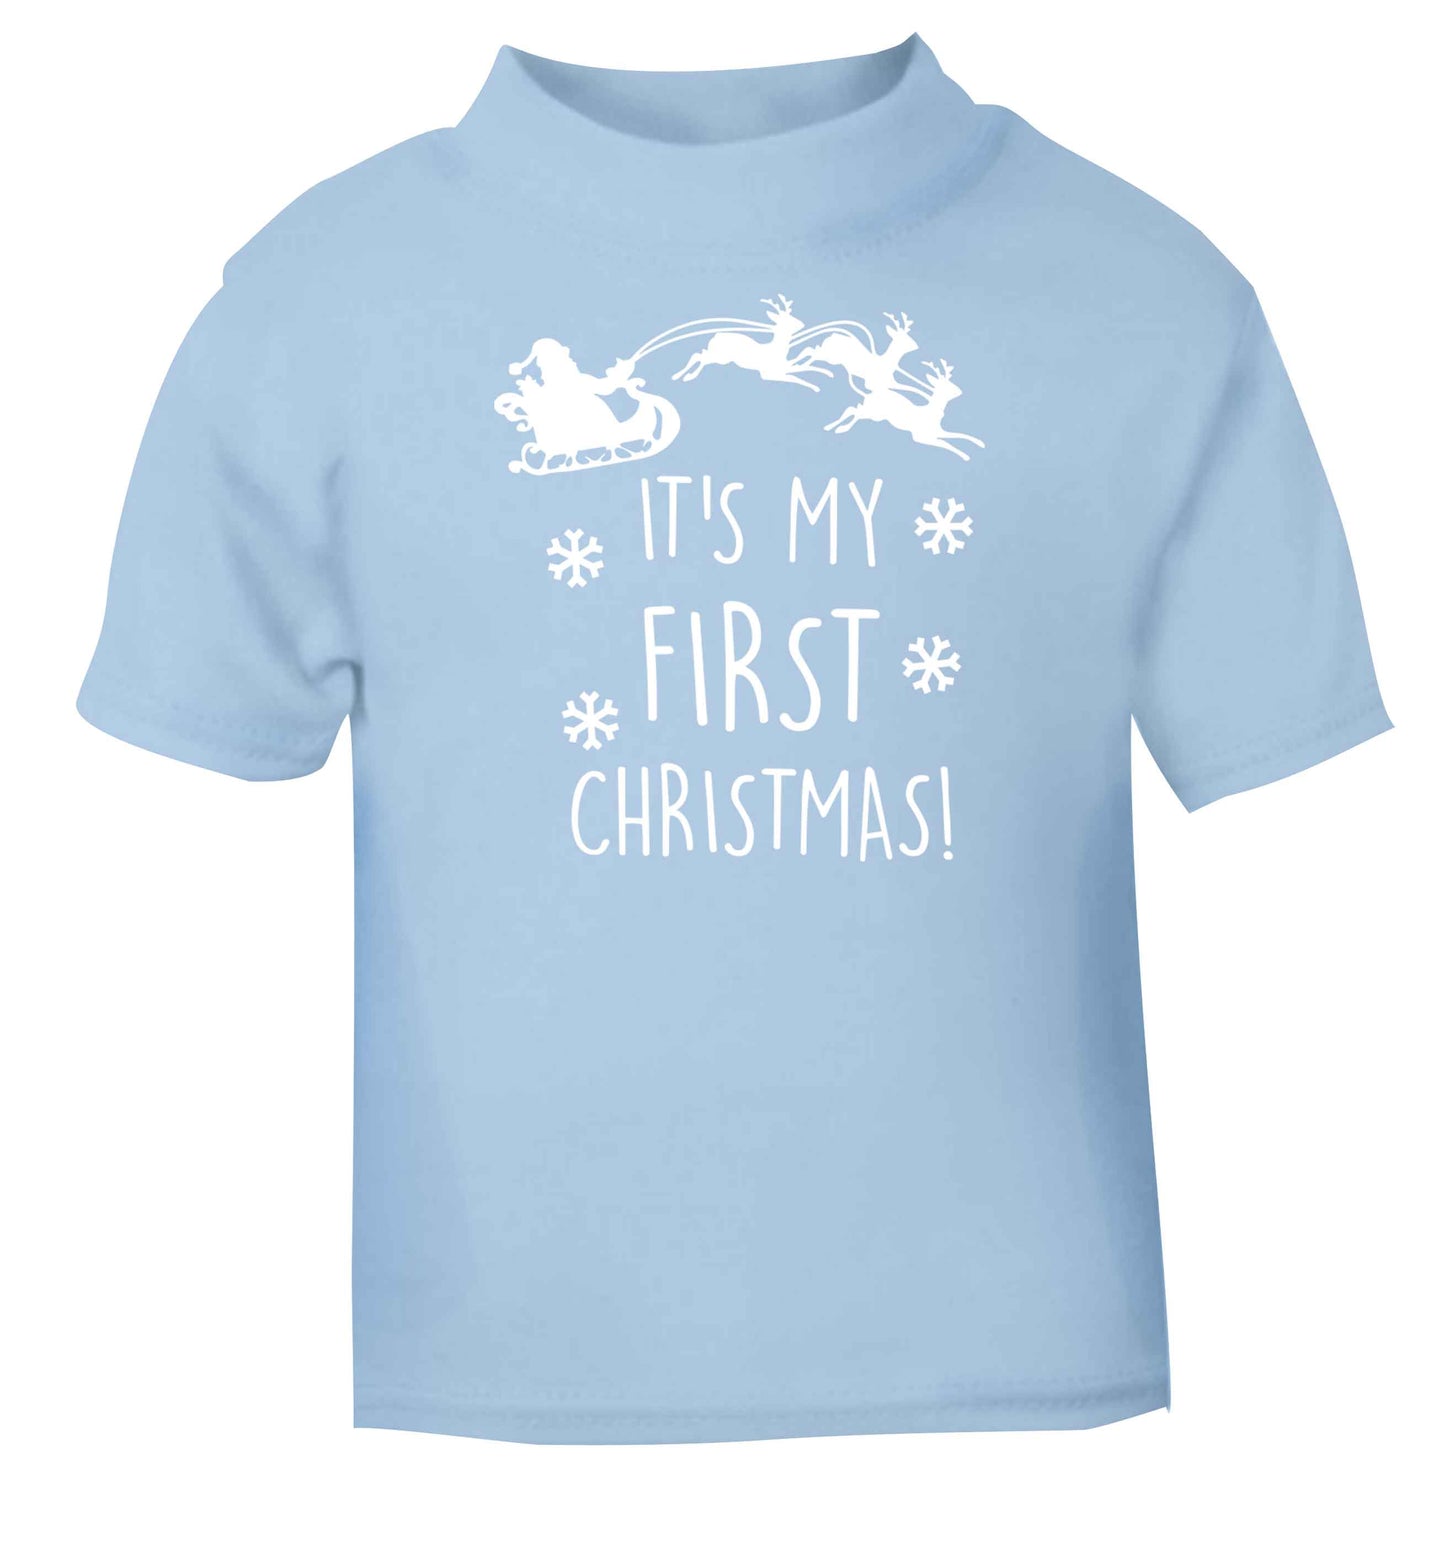 It's my first Christmas - Santa sleigh text light blue baby toddler Tshirt 2 Years